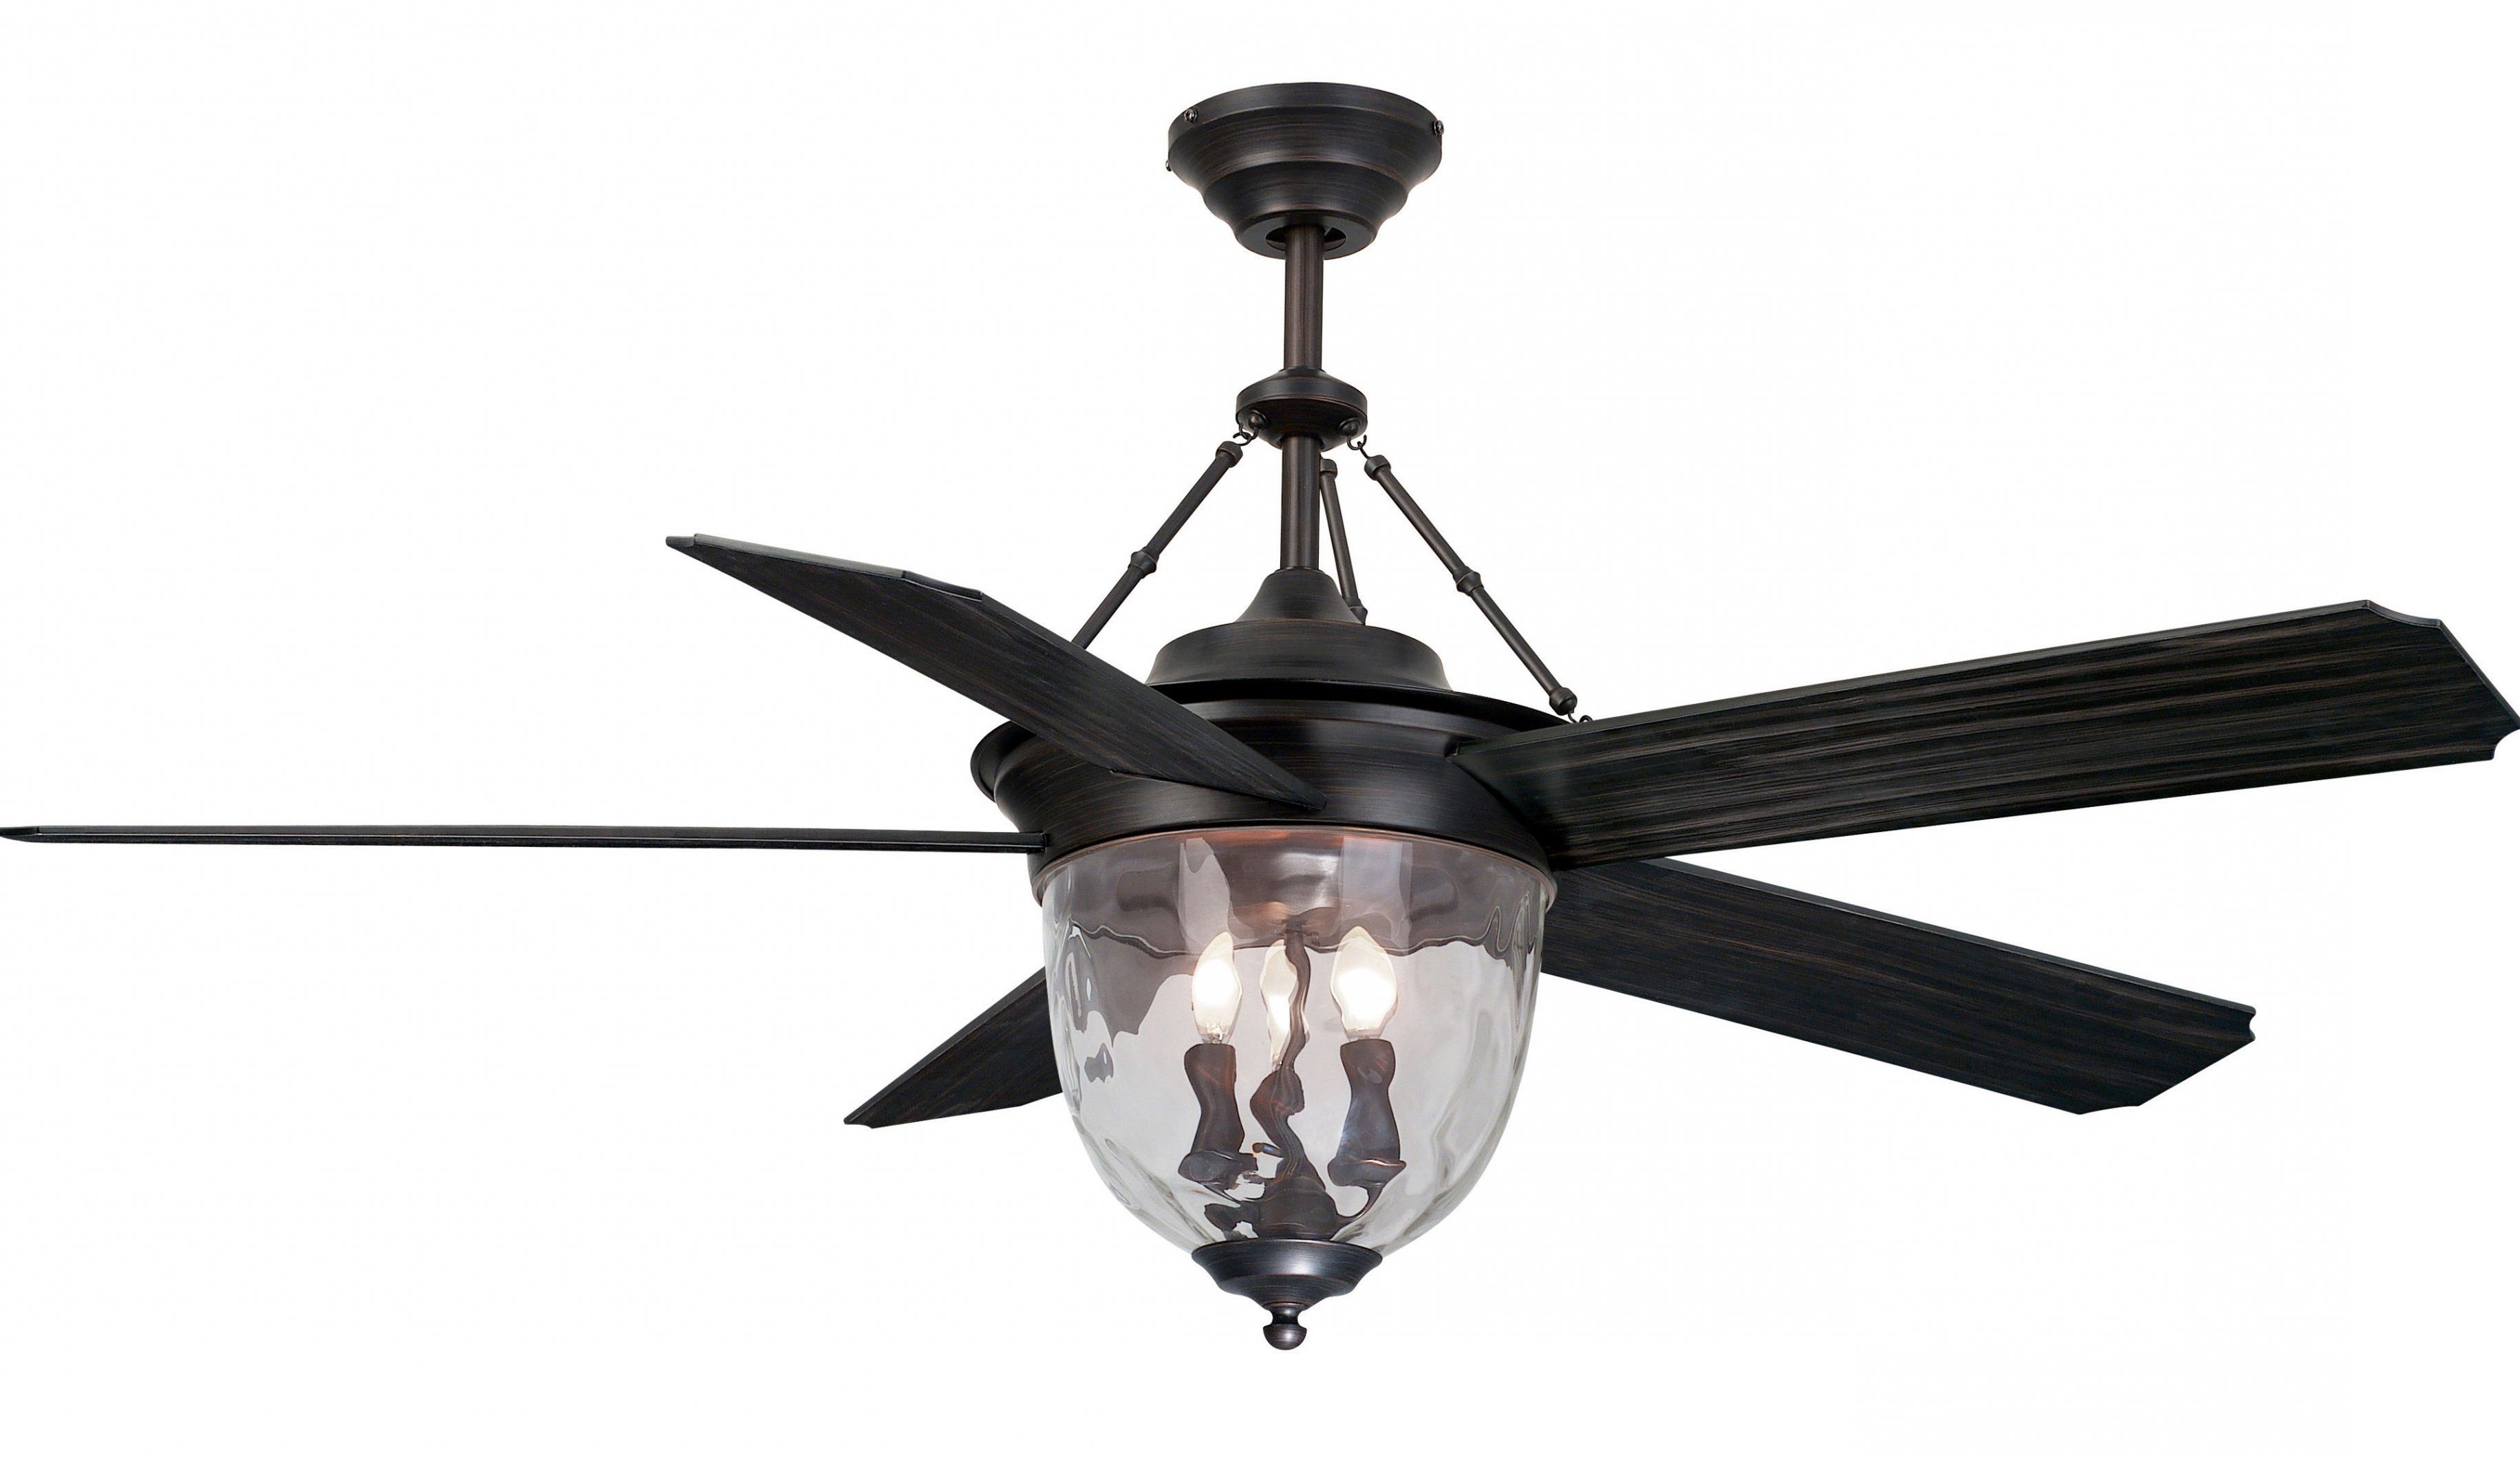 Outdoor Ceiling Fans With Lights Lowes: Amusing Lowes Ceiling Fans With Regard To Most Popular Outdoor Ceiling Fans With Light At Lowes (View 12 of 20)